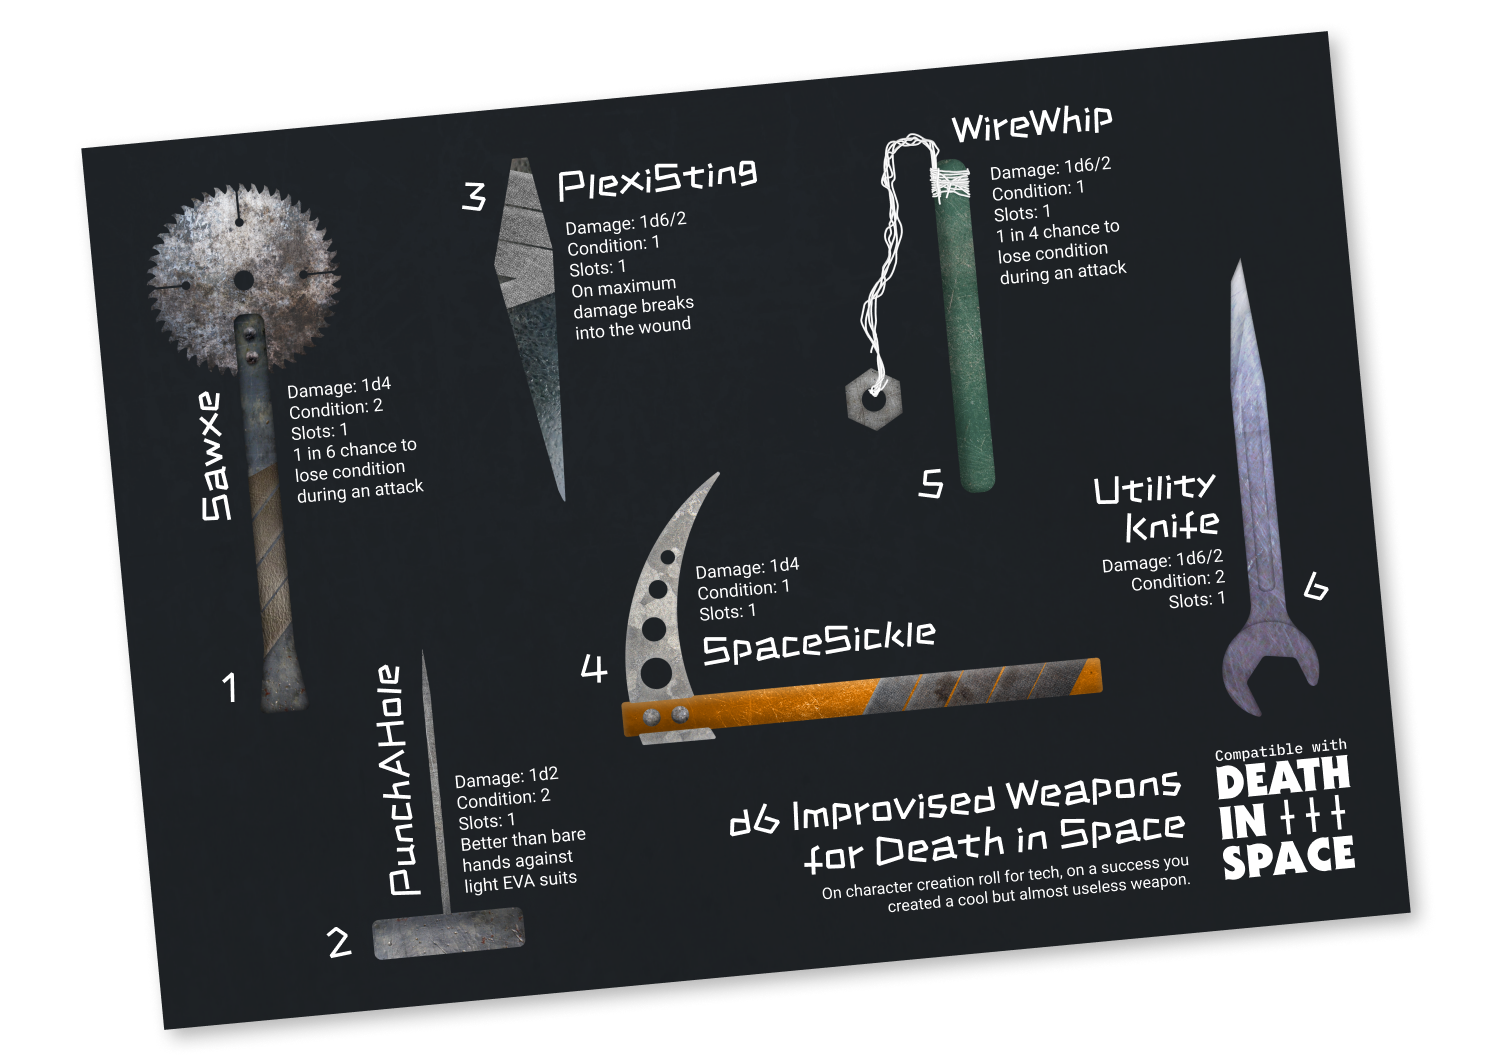 d6 Improvised Weapons for Death in Space